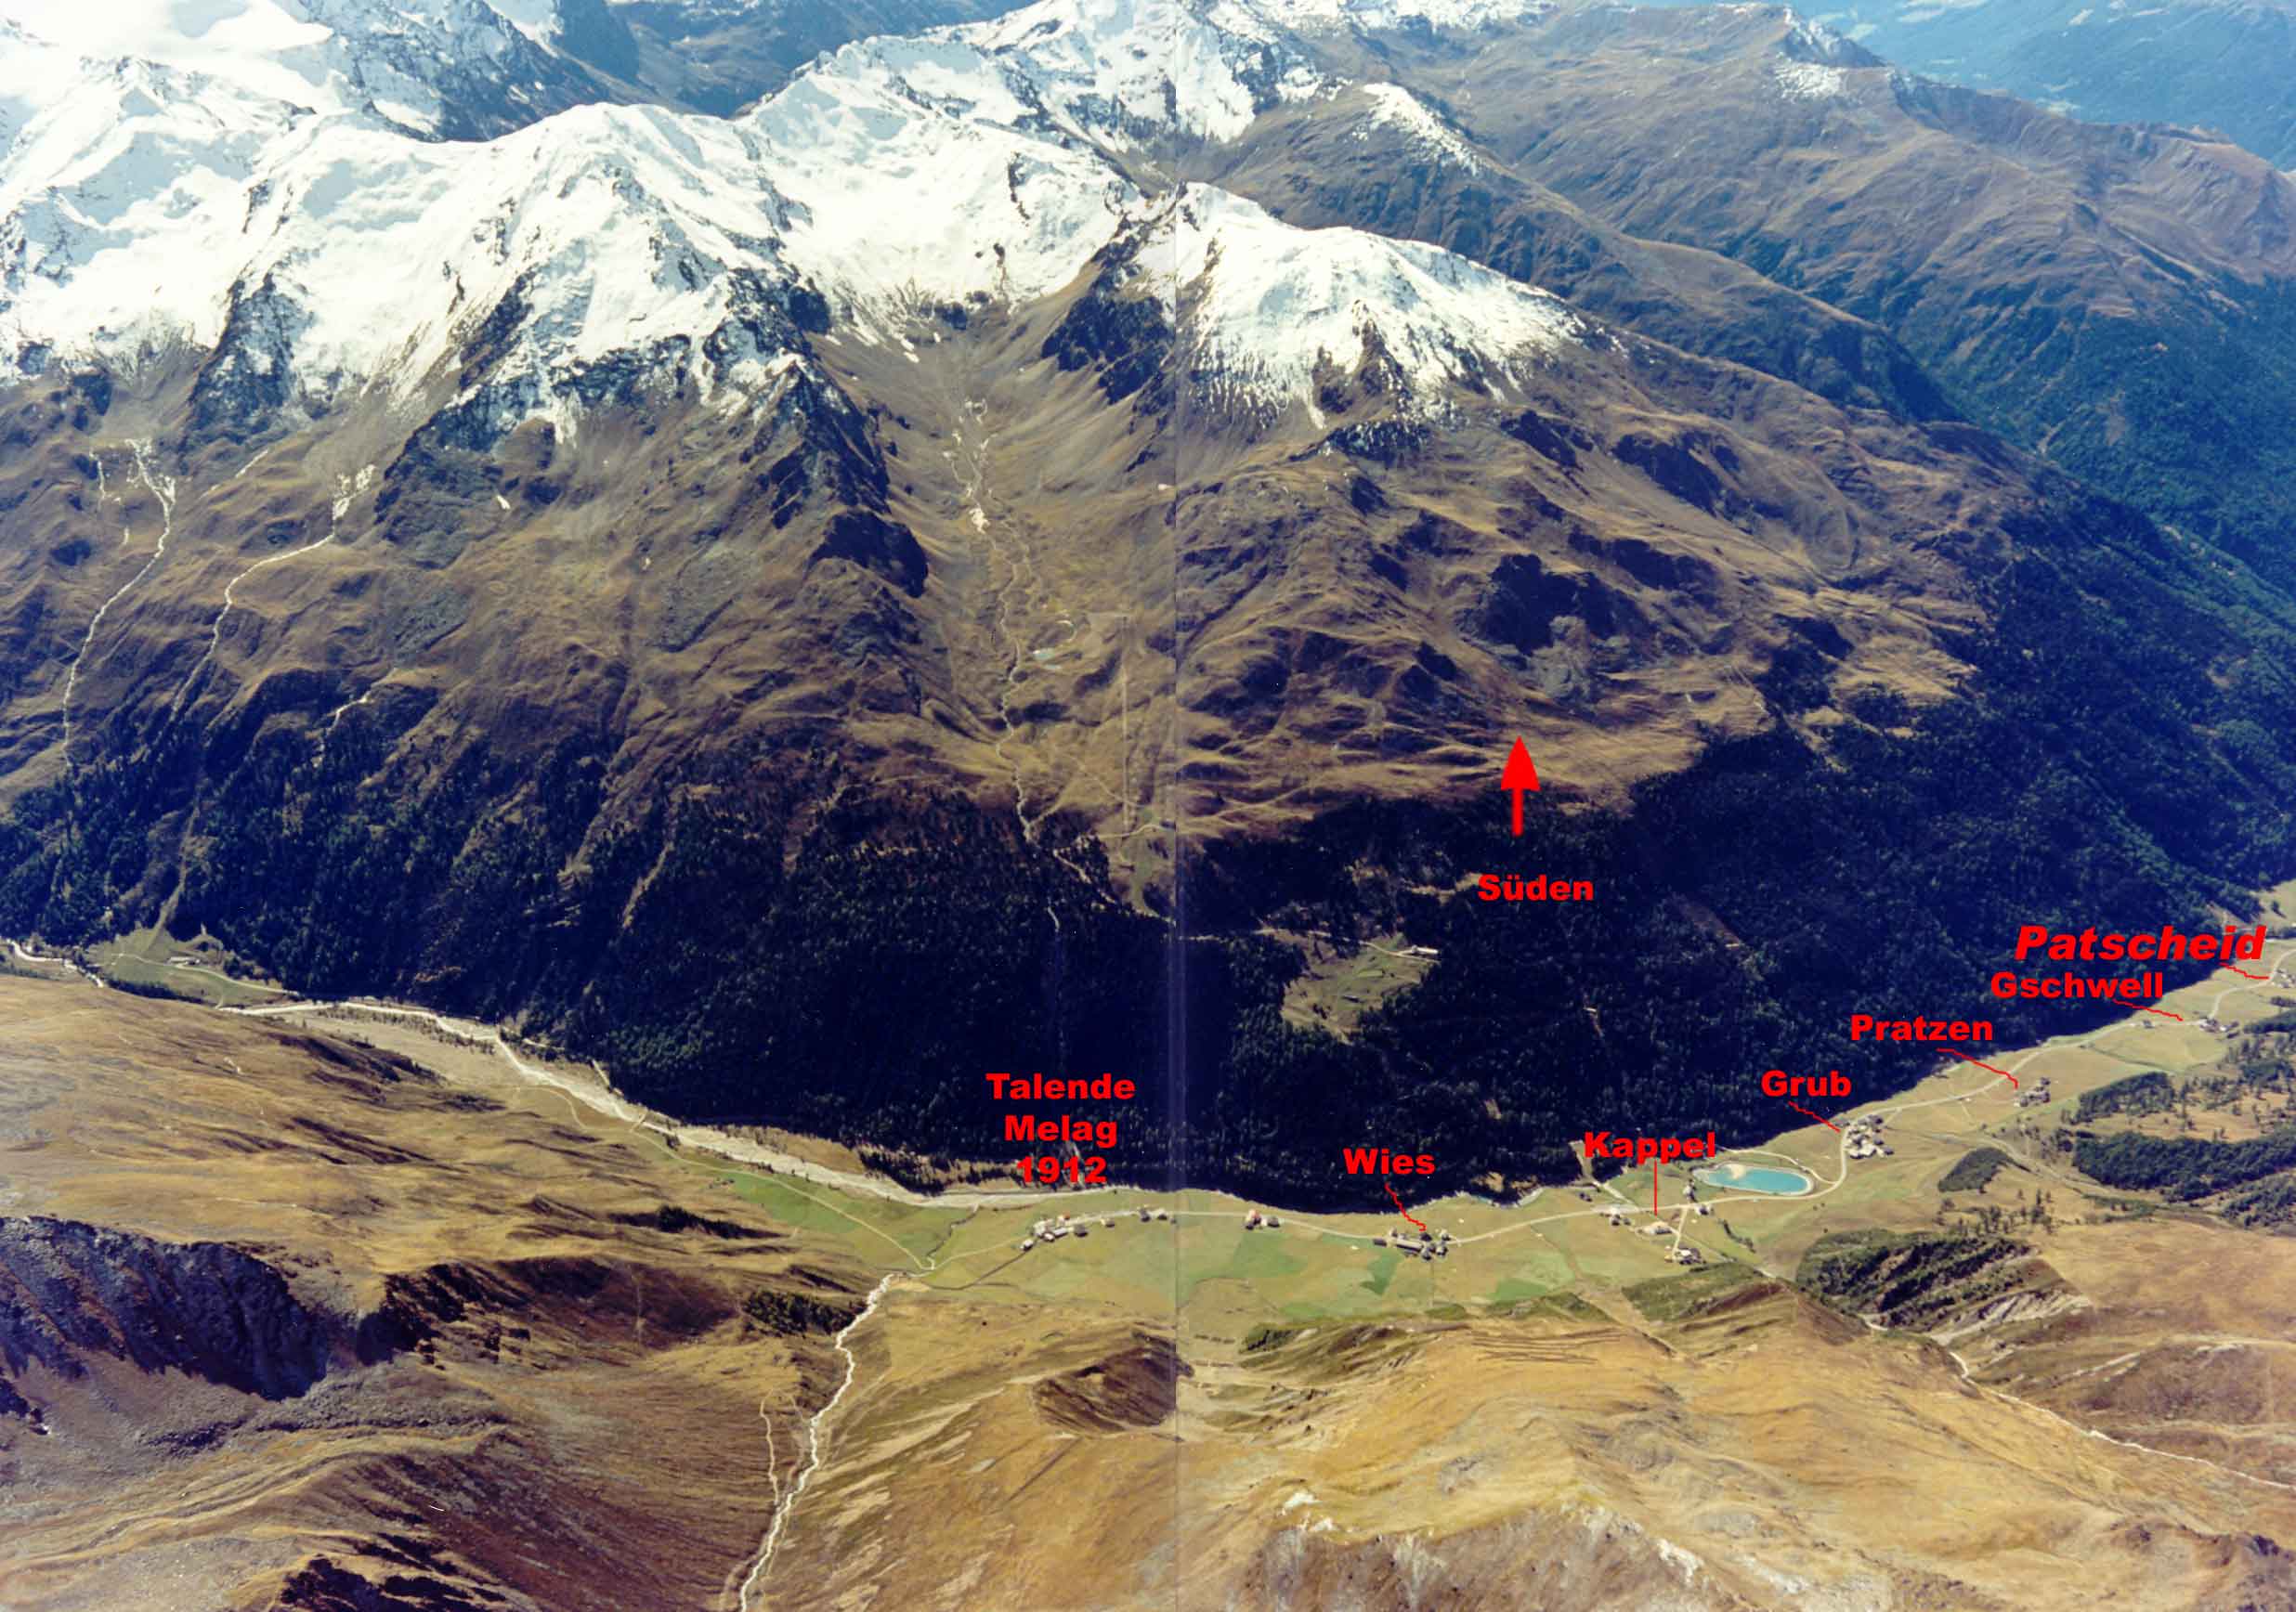 Aerial view of the Langtaufer valley with the location of the individual farms: Melag, Wies, Kappl, Grub, Pratzen, Gschwell and Patscheid.